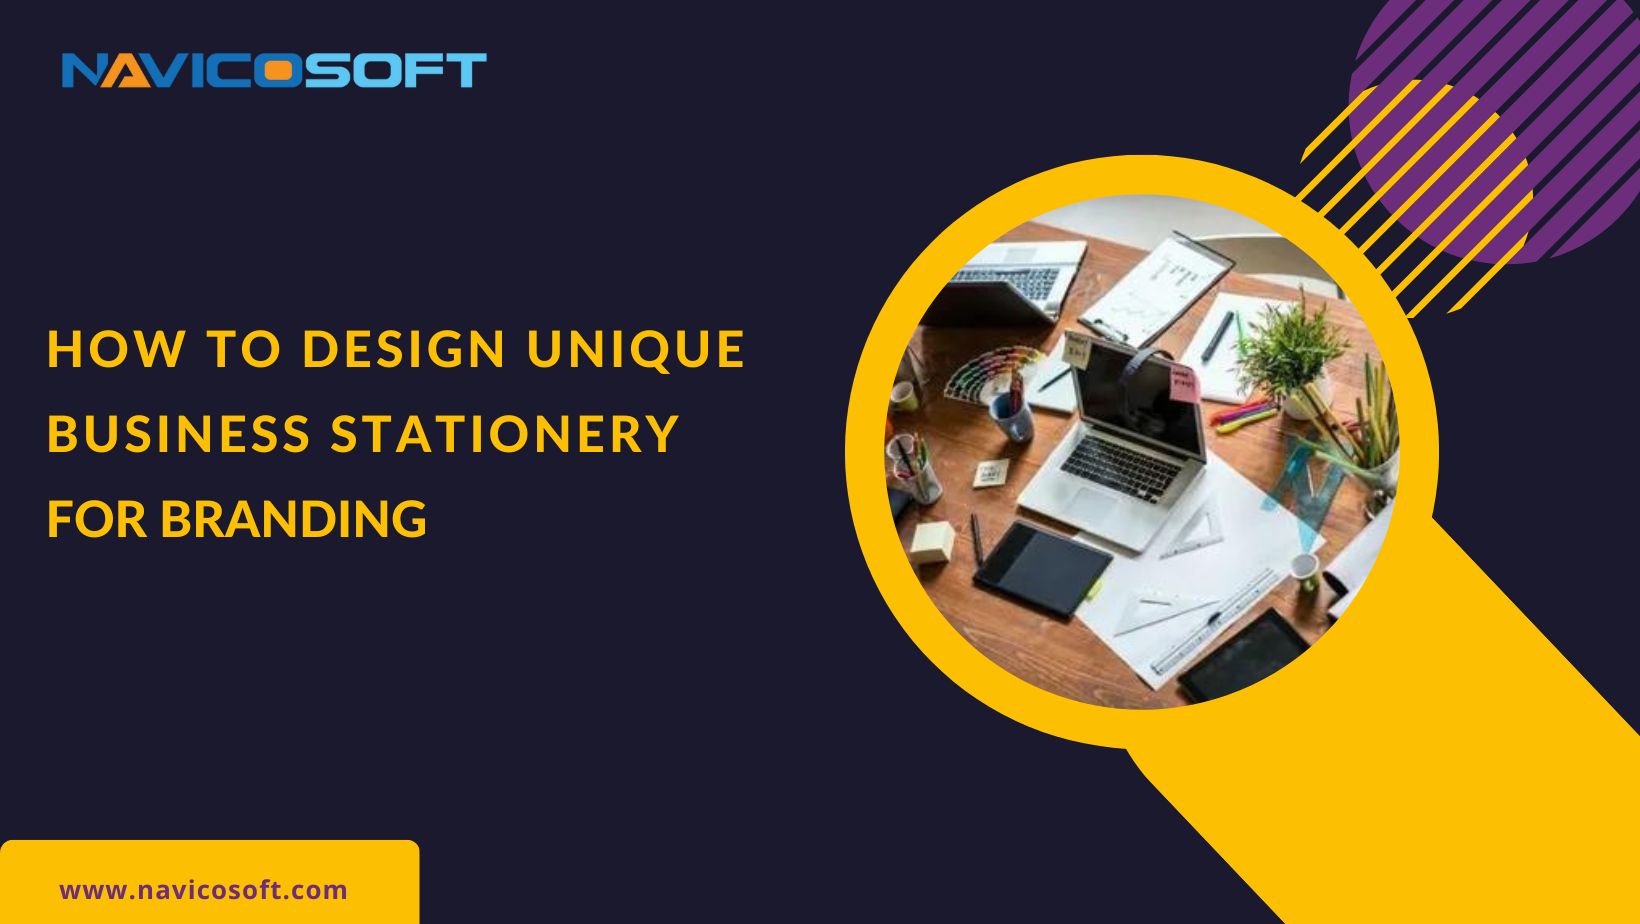 Business stationery design services